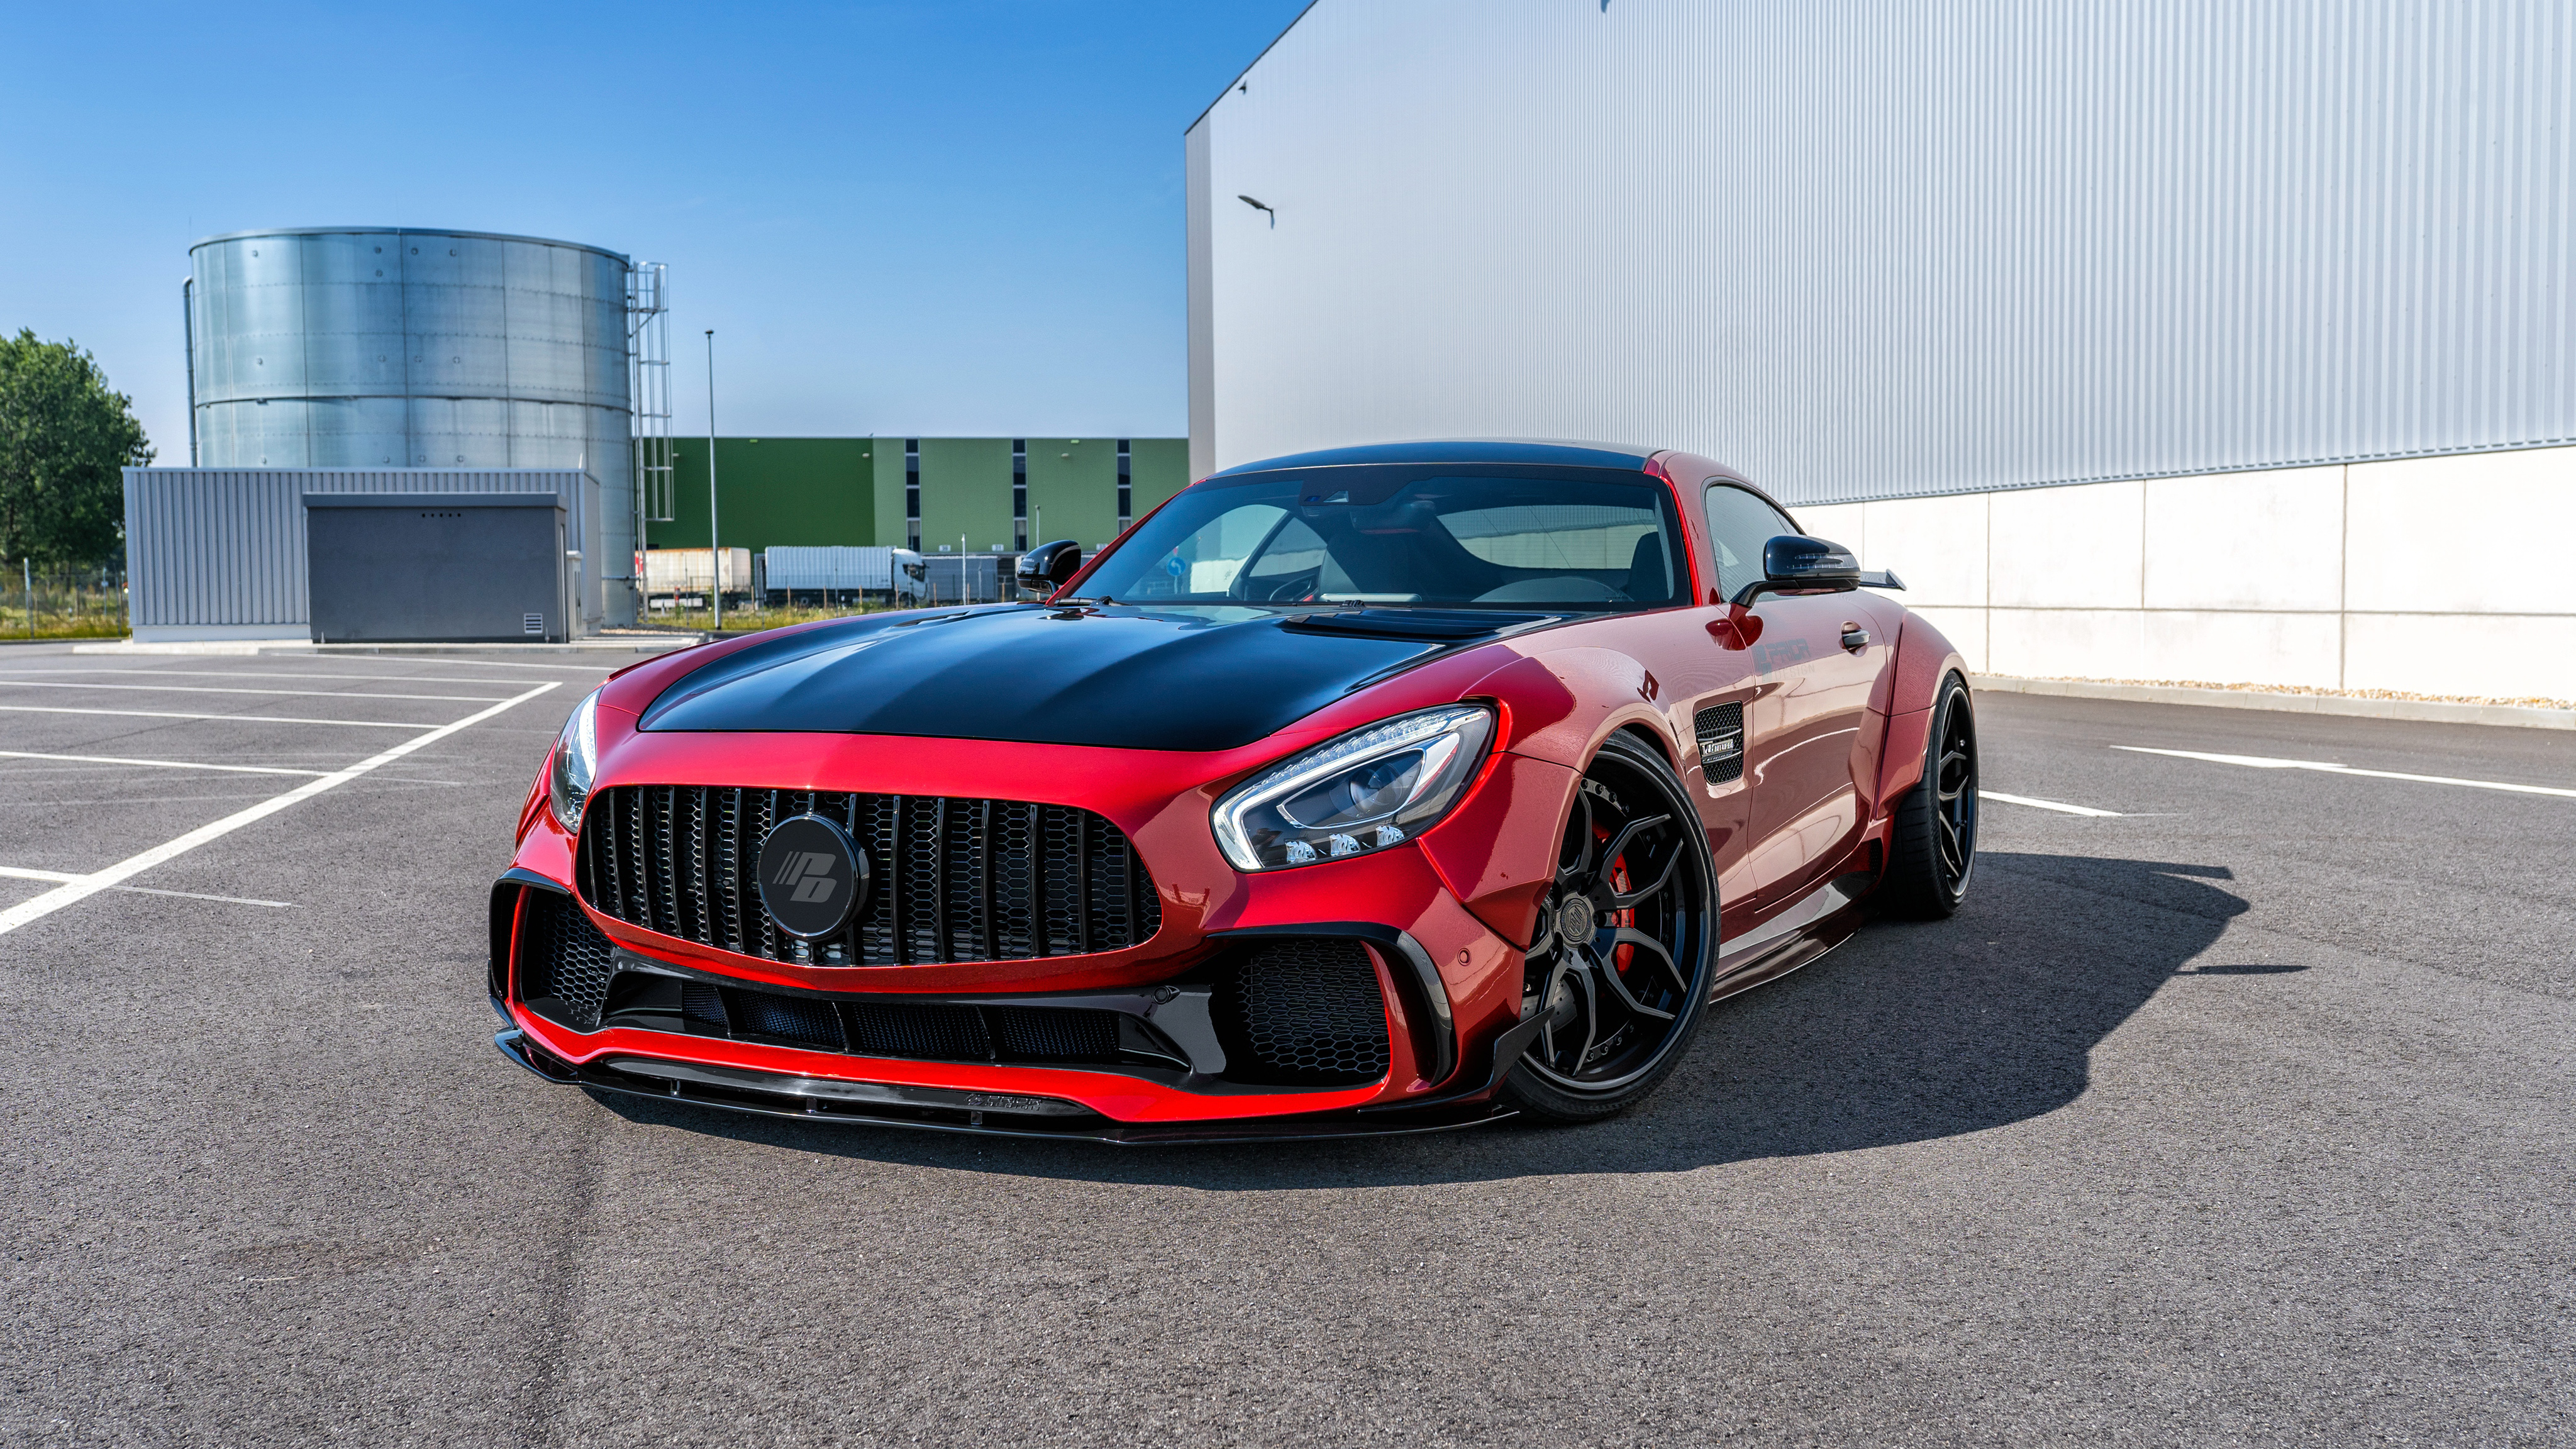 Amg Gts Widebody Kit , HD Wallpaper & Backgrounds